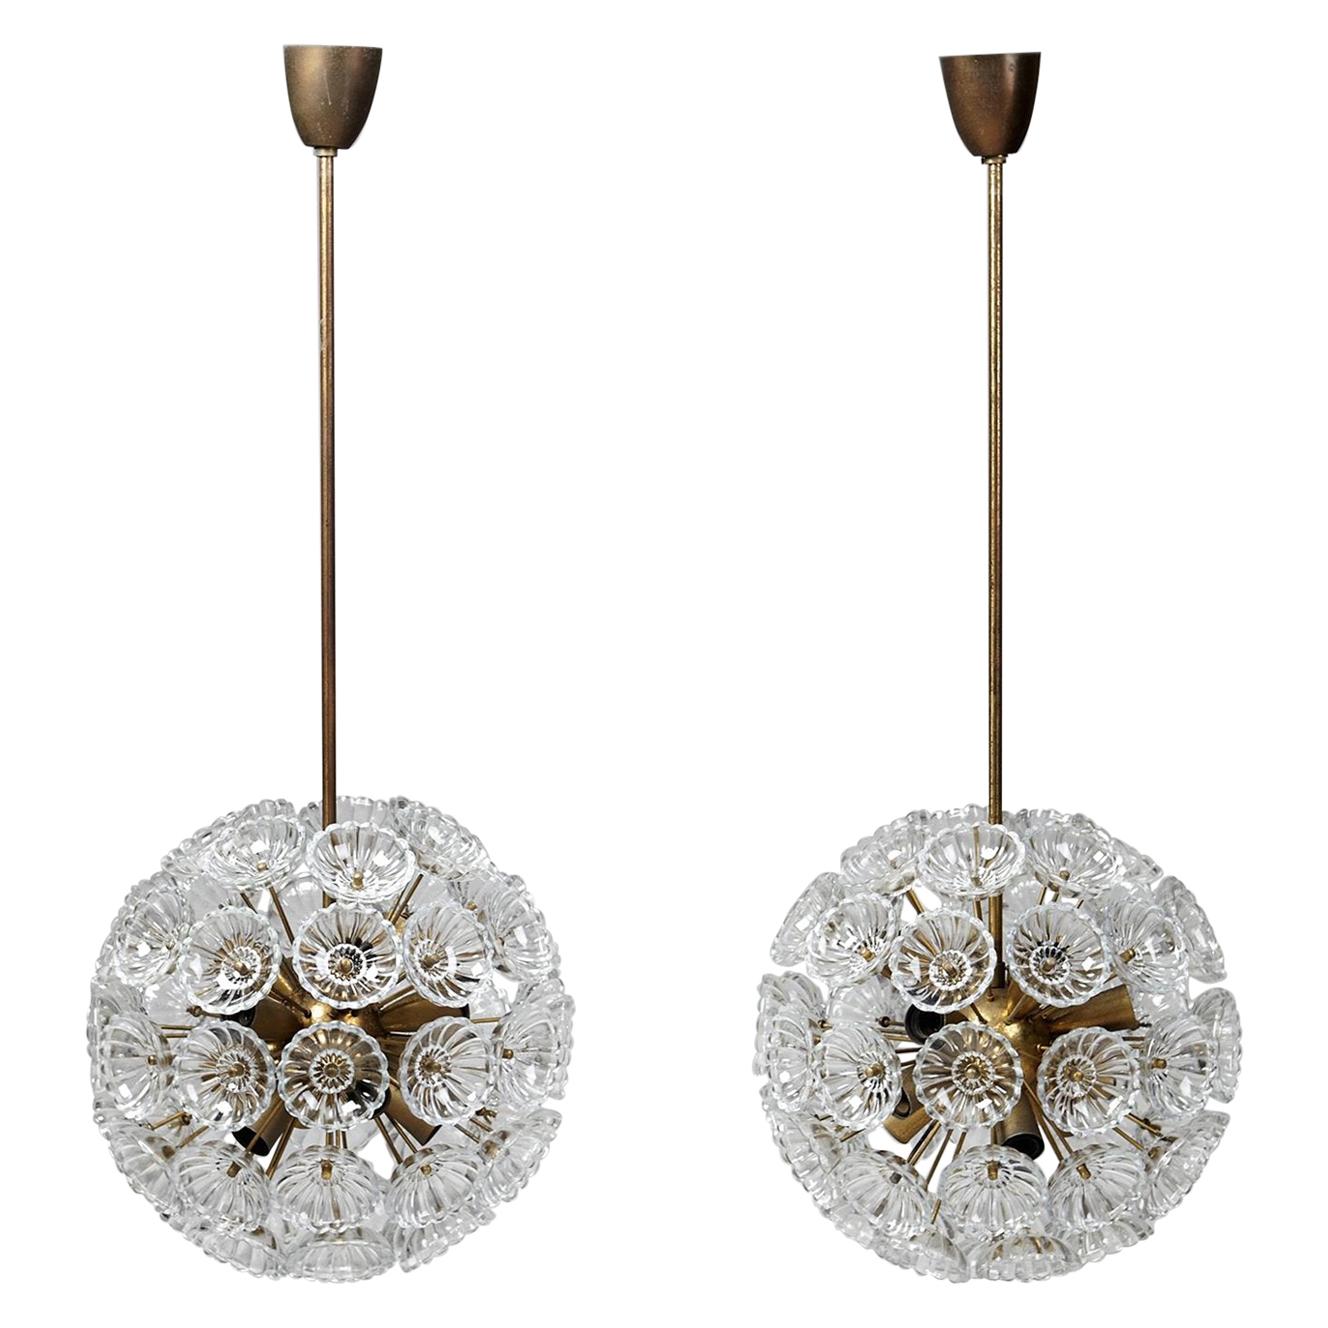 Pair of Ceiling Lamps Designed by Carl Fagerlund for Orrefors, Sweden, 1960s